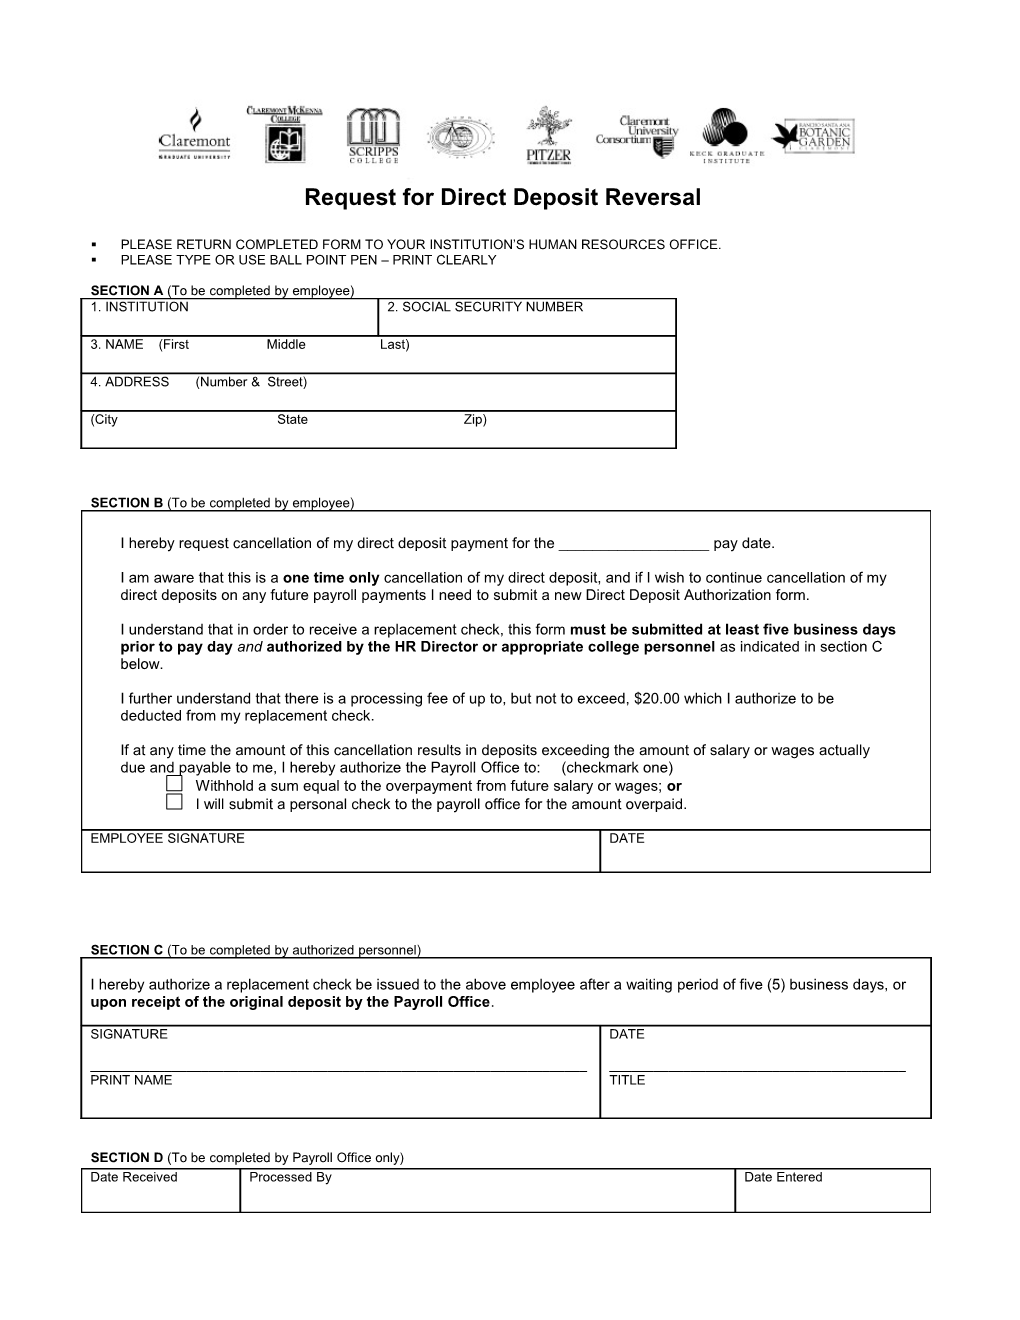 Request for Direct Deposit Reversal